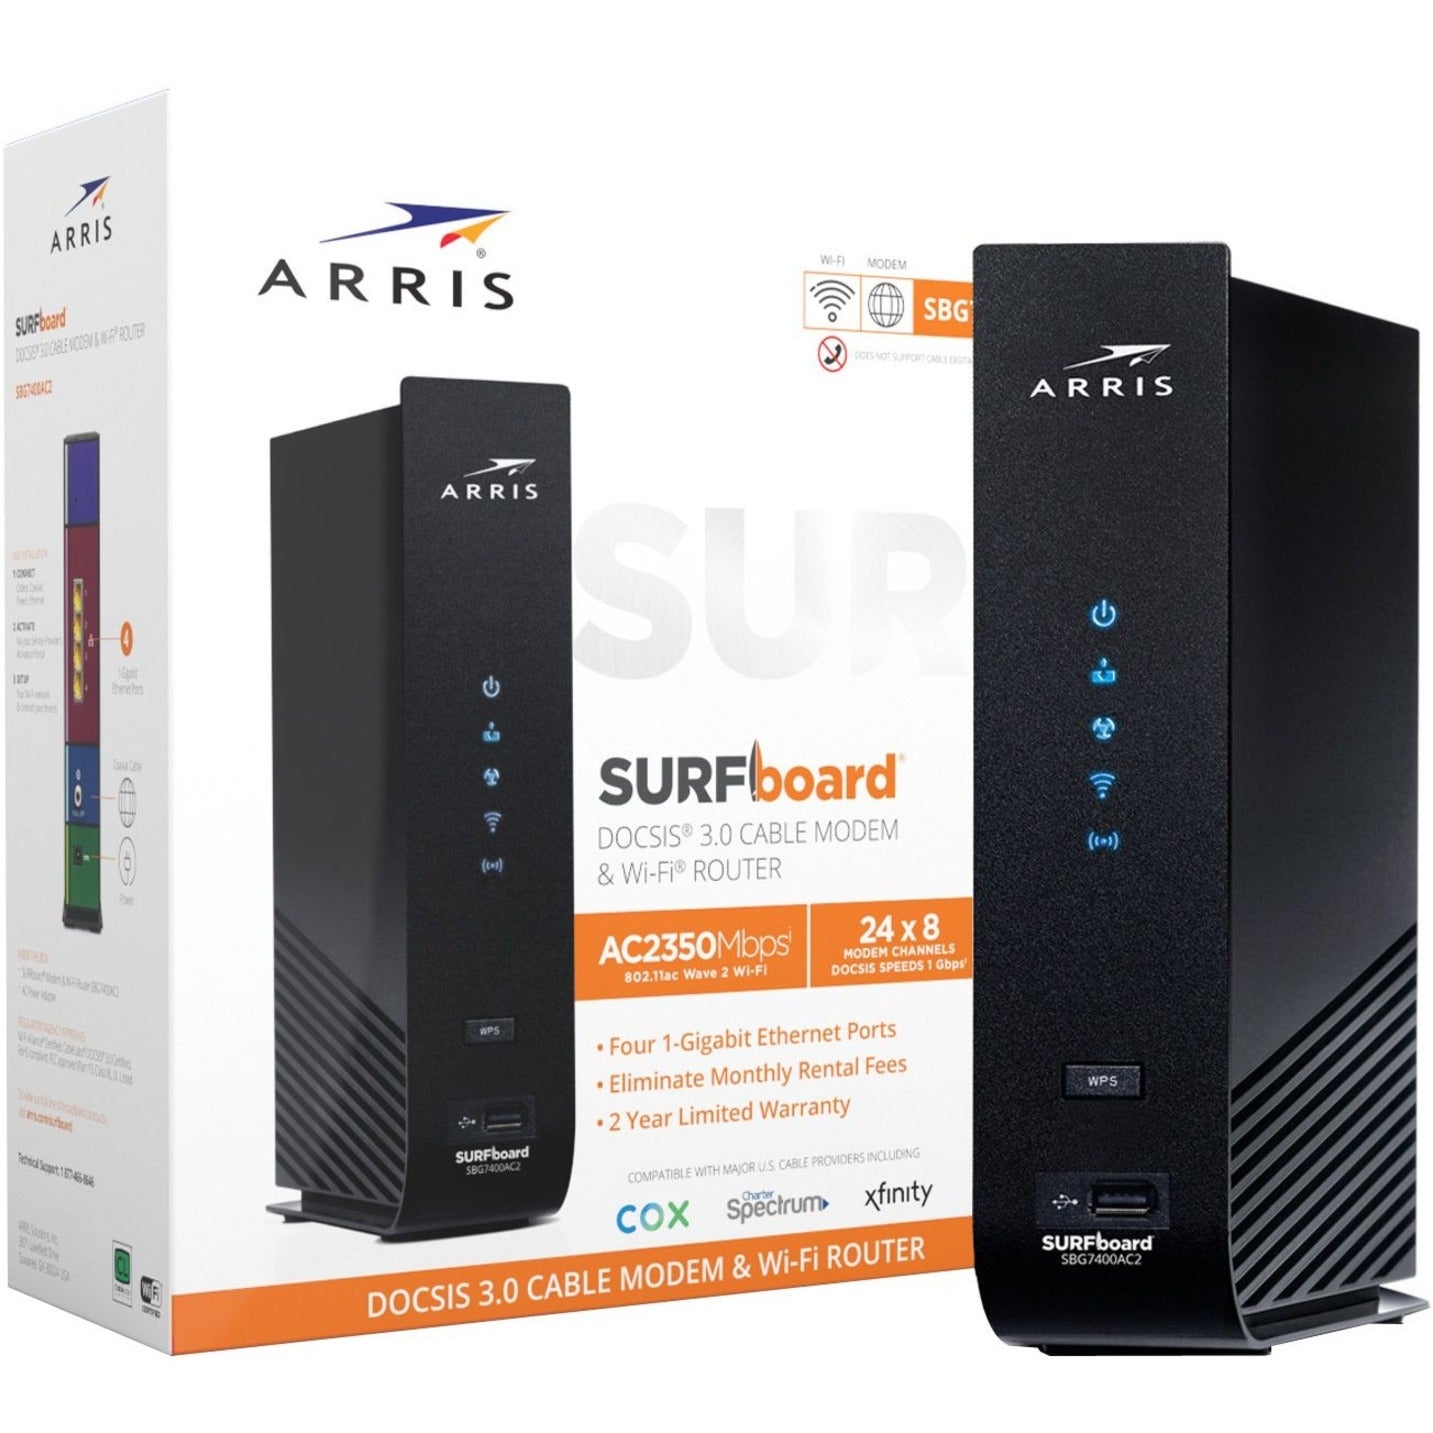 SURFboard 1000548 DOCSIS 3.0 Cable Modem & Wi-Fi Router, Dual Band, Gigabit Ethernet, Wi-Fi 5, 293.75 MB/s